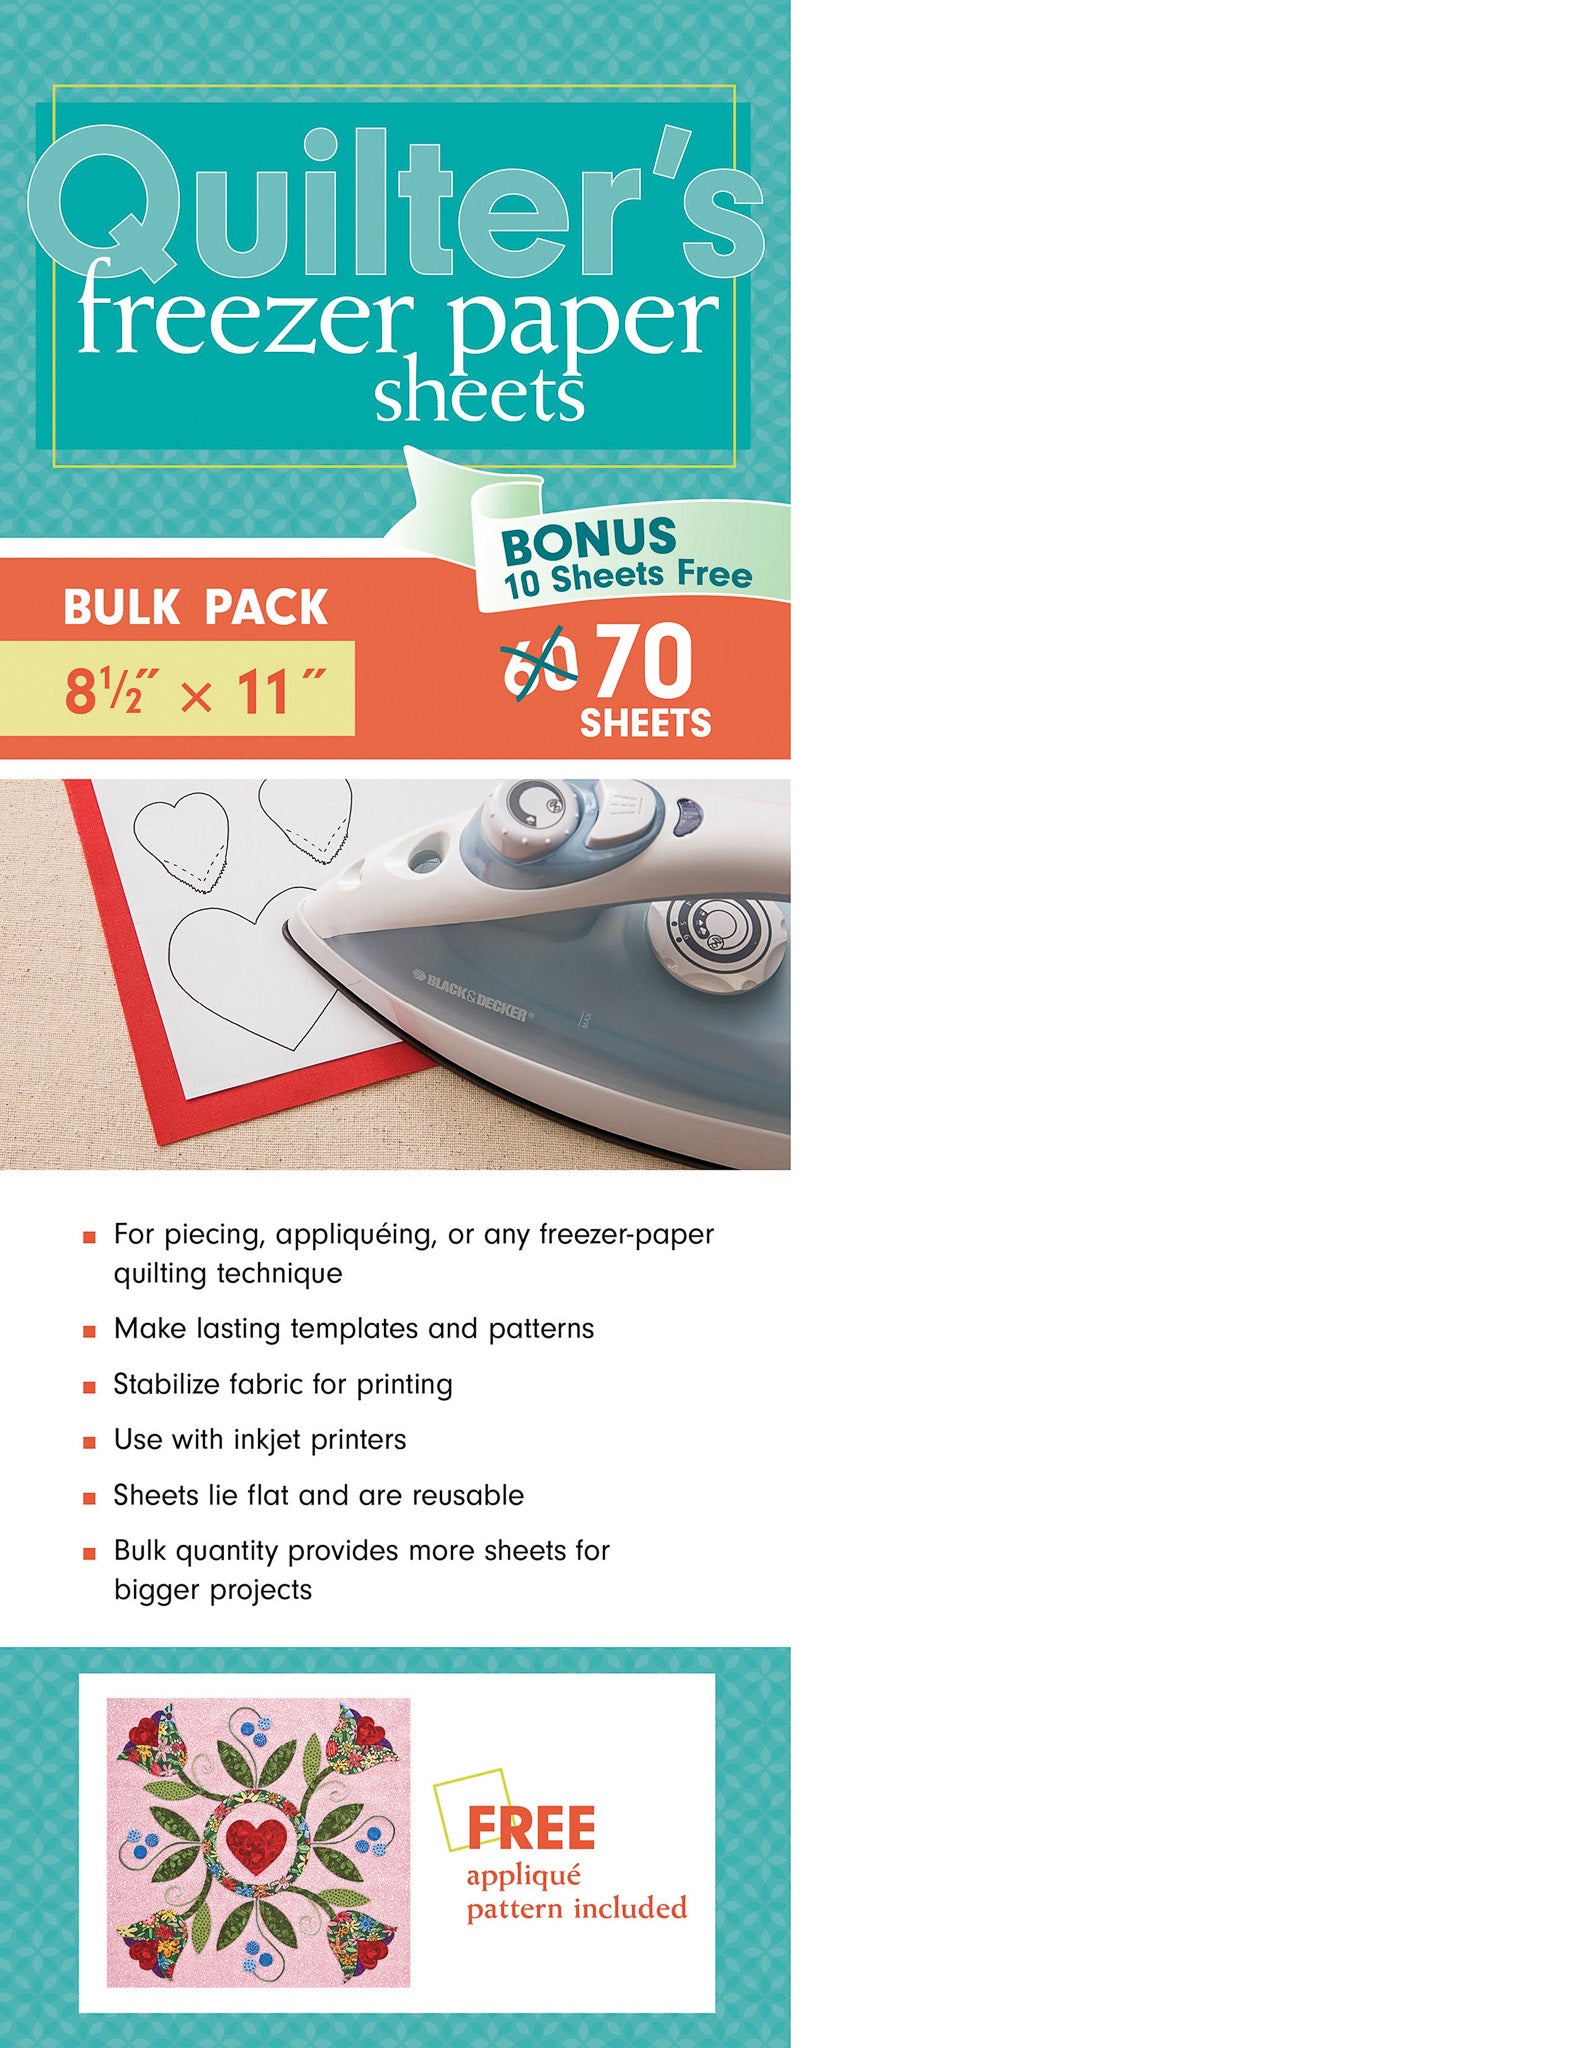 Freezer Paper: Your Go-To for Paper Piecing, Applique, Stenciling and Beyond